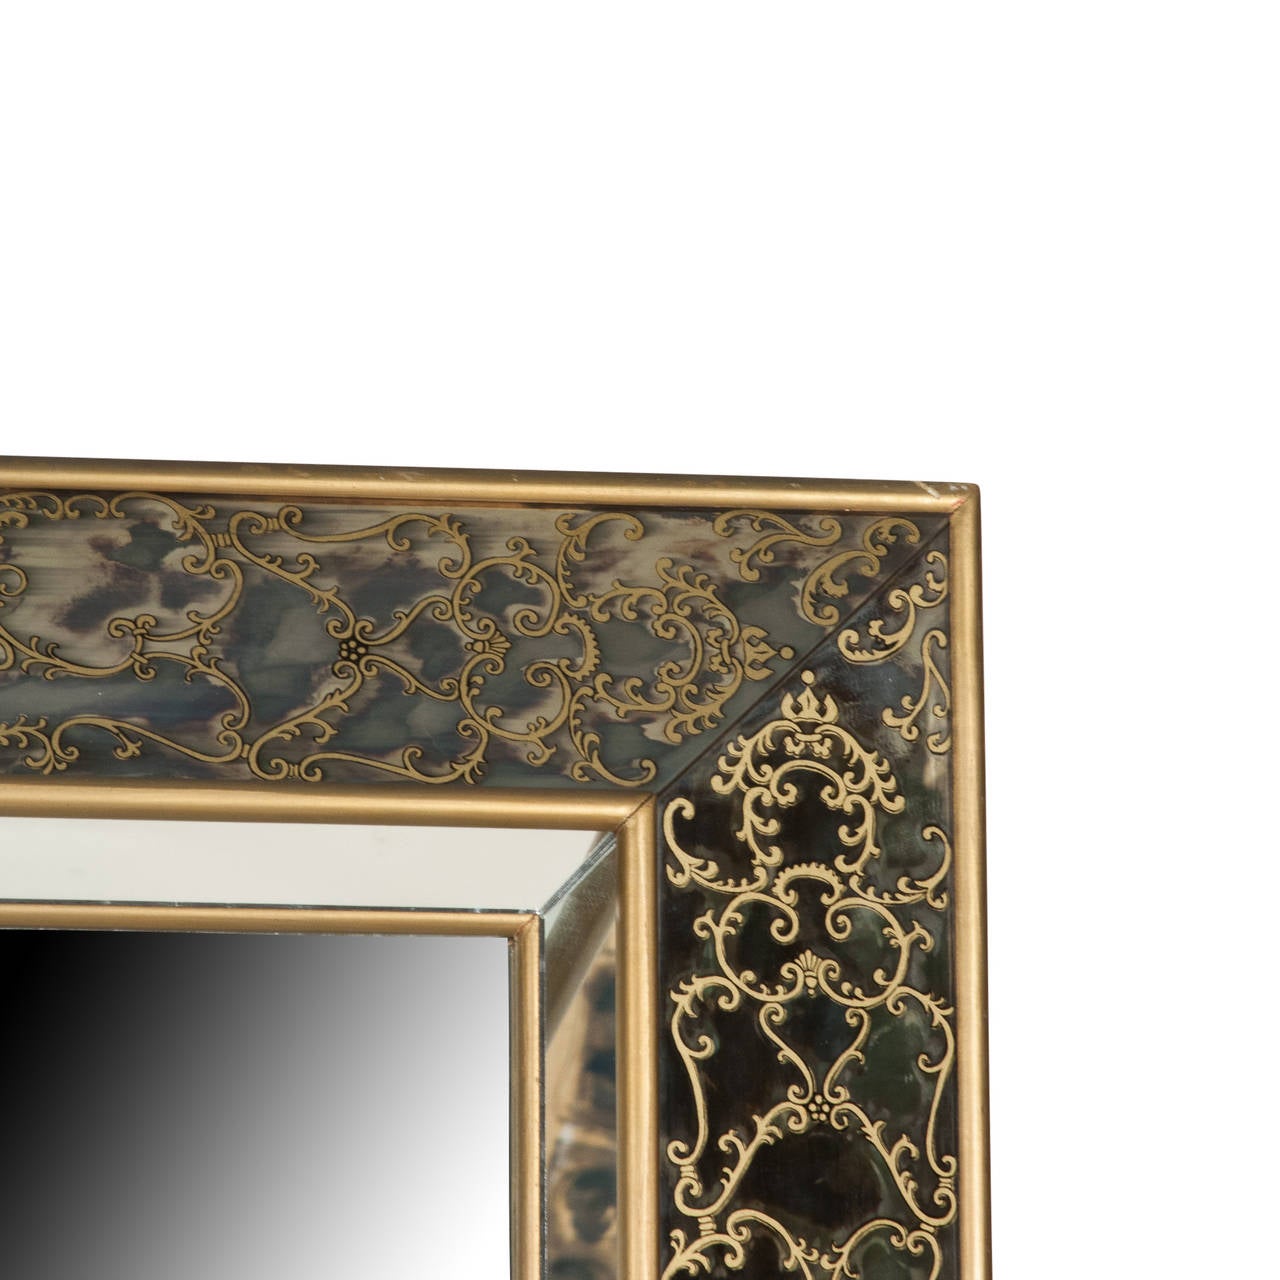 Large paneled wall mirror, of rectangular form. The central mirror surrounded by reverse painted mirror border, with giltwood frame and borders, American, 1960s. Dimensions: 60 in x 48 in, depth 3 in. width of outer panel 5 in. Interior mirror